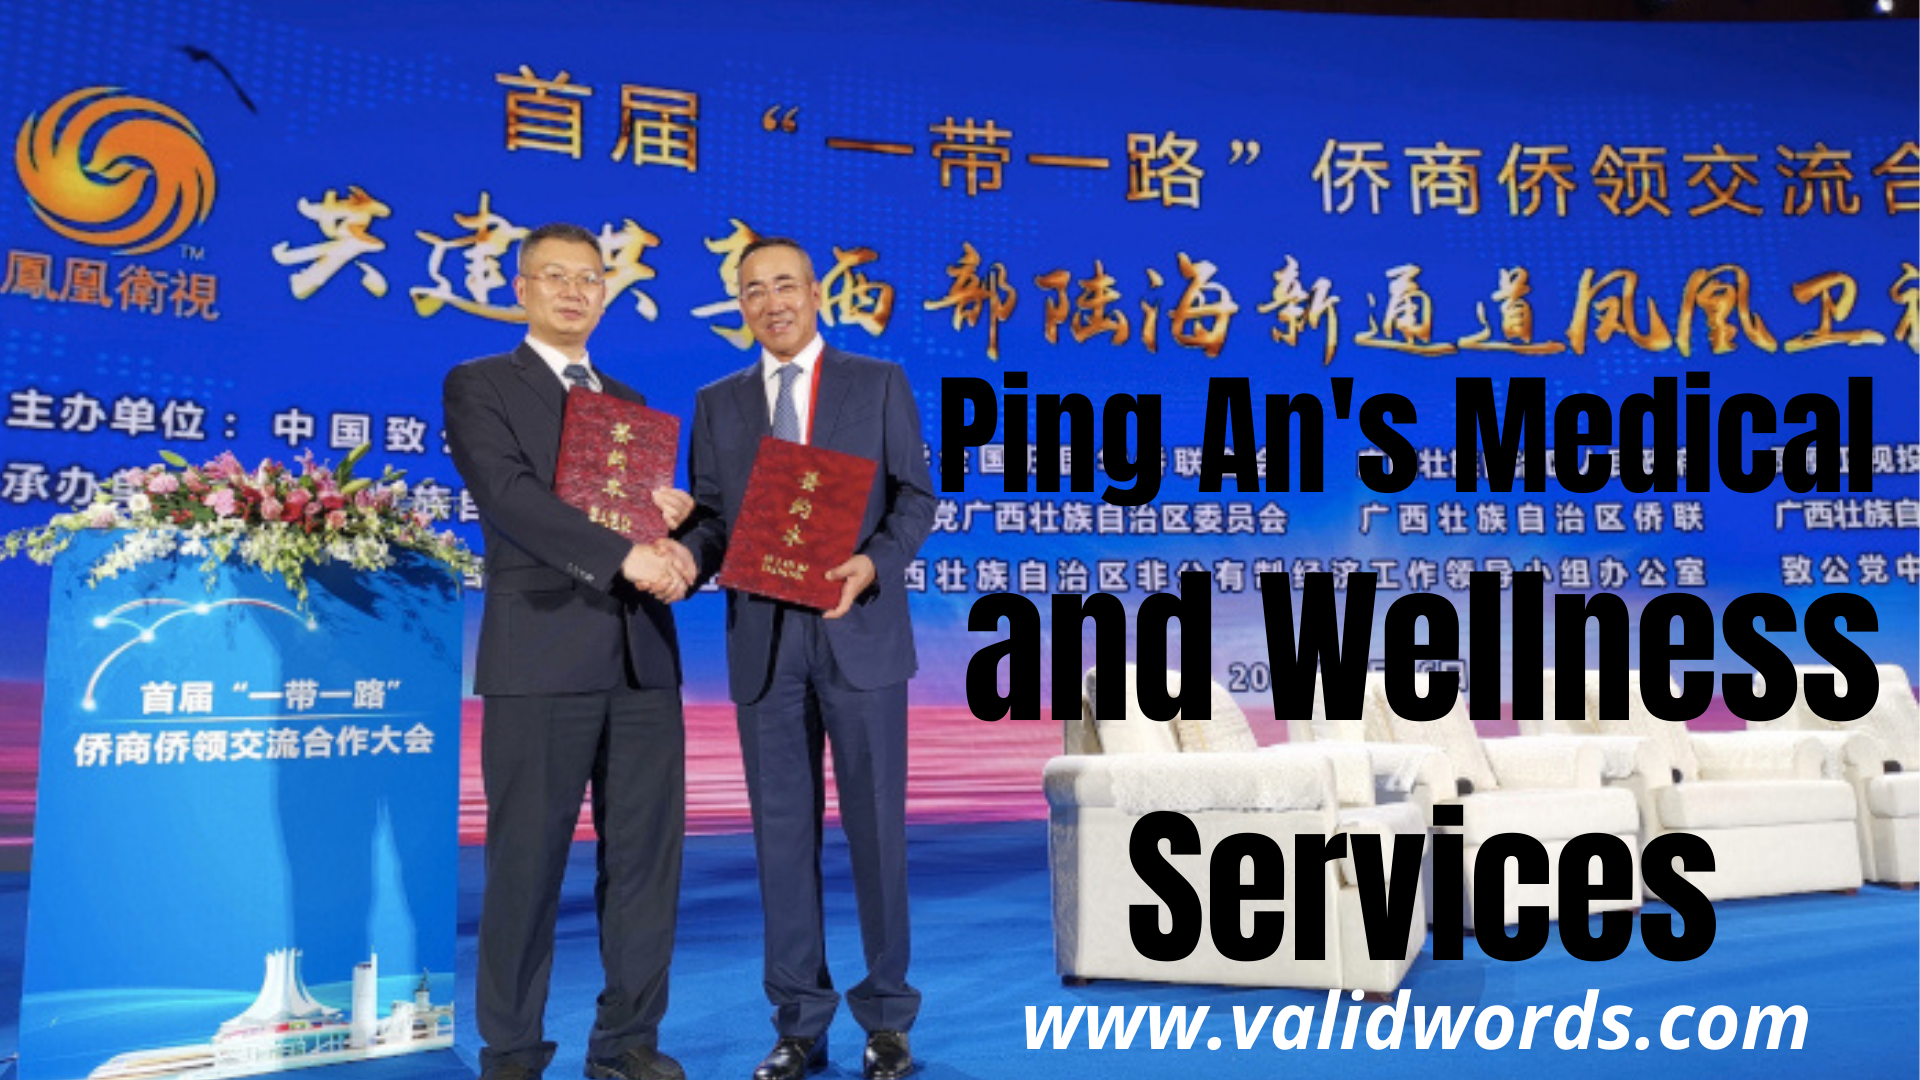 Ping An's Medical and Wellness Services